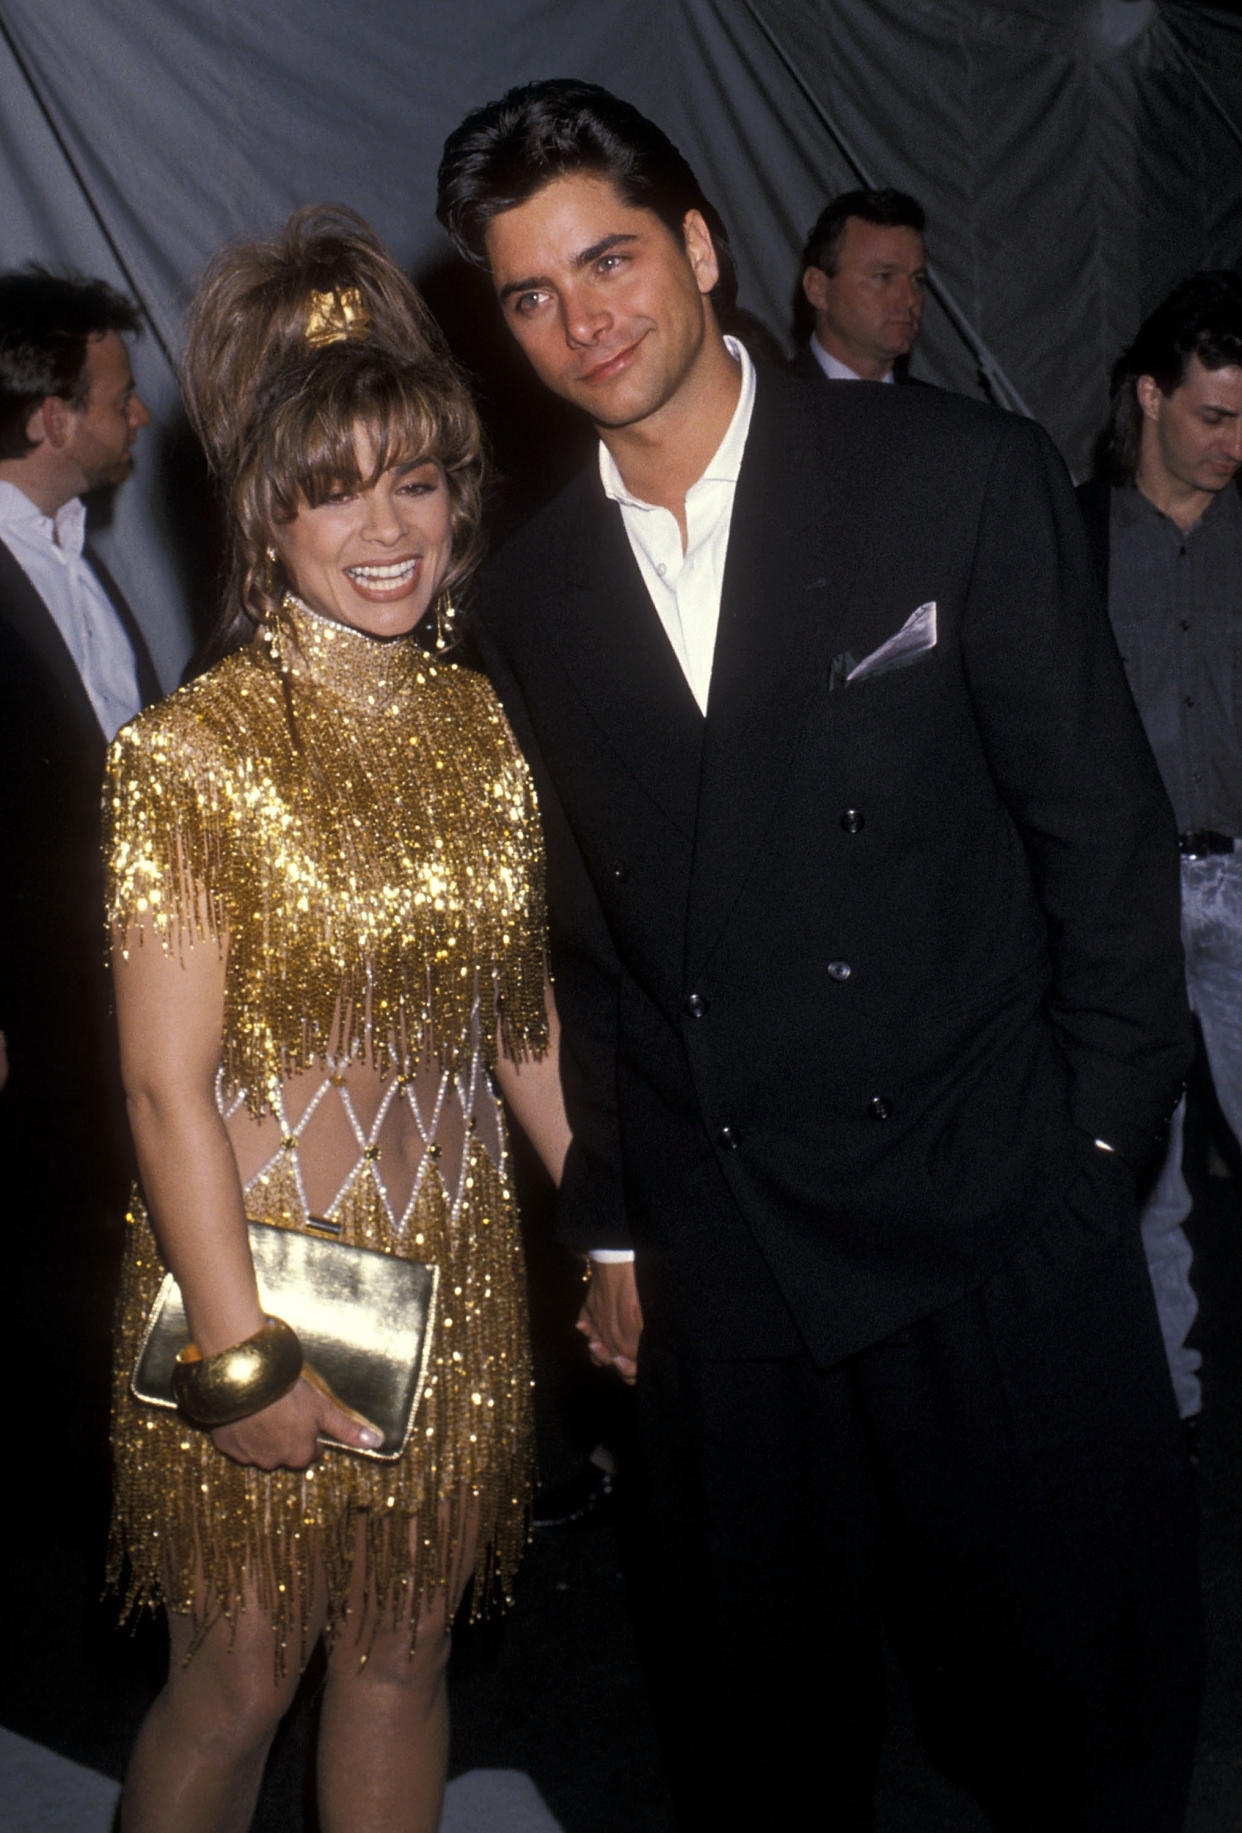 LOS ANGELES - FEBRUARY 21:   Singer Paula Abdul and actor John Stamos attend the 32nd Annual Grammy Awards on February 21, 1990 at the Shrine Auditorium in Los Angeles, California. (Photo by Ron Galella, Ltd./Ron Galella Collection via Getty Images) 